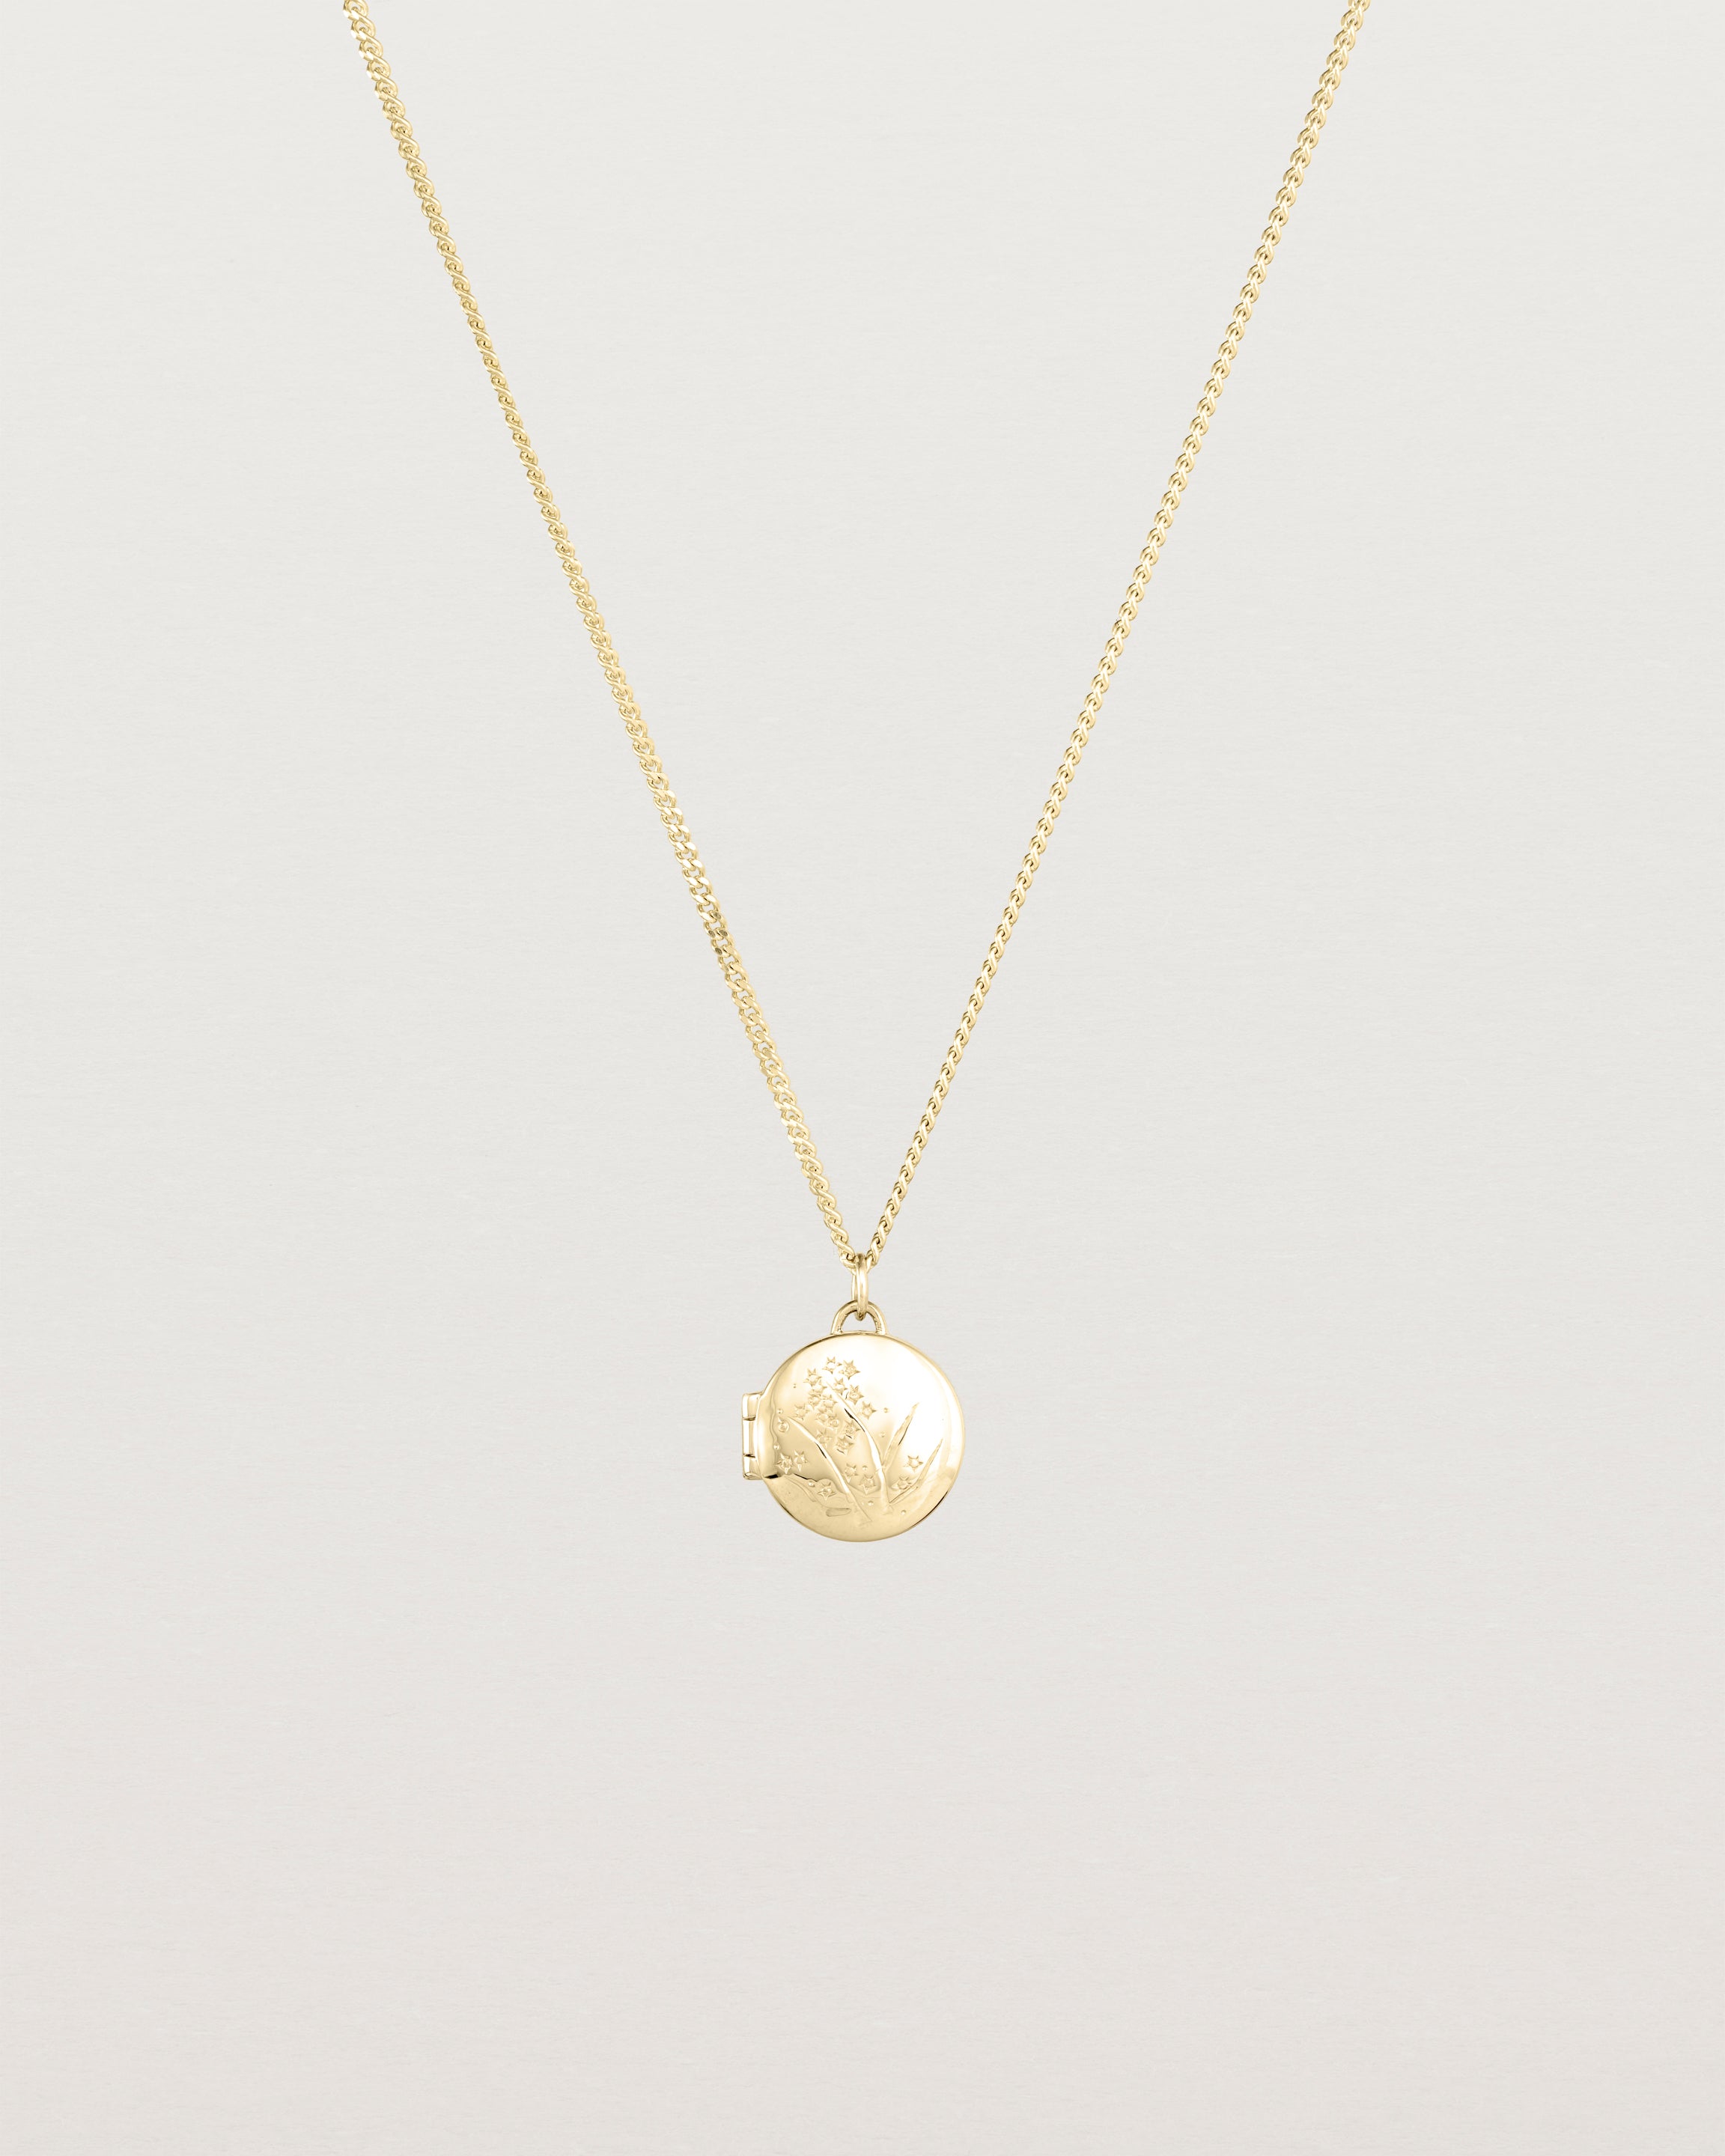 Front view of the Golden Wattle Locket in yellow gold.